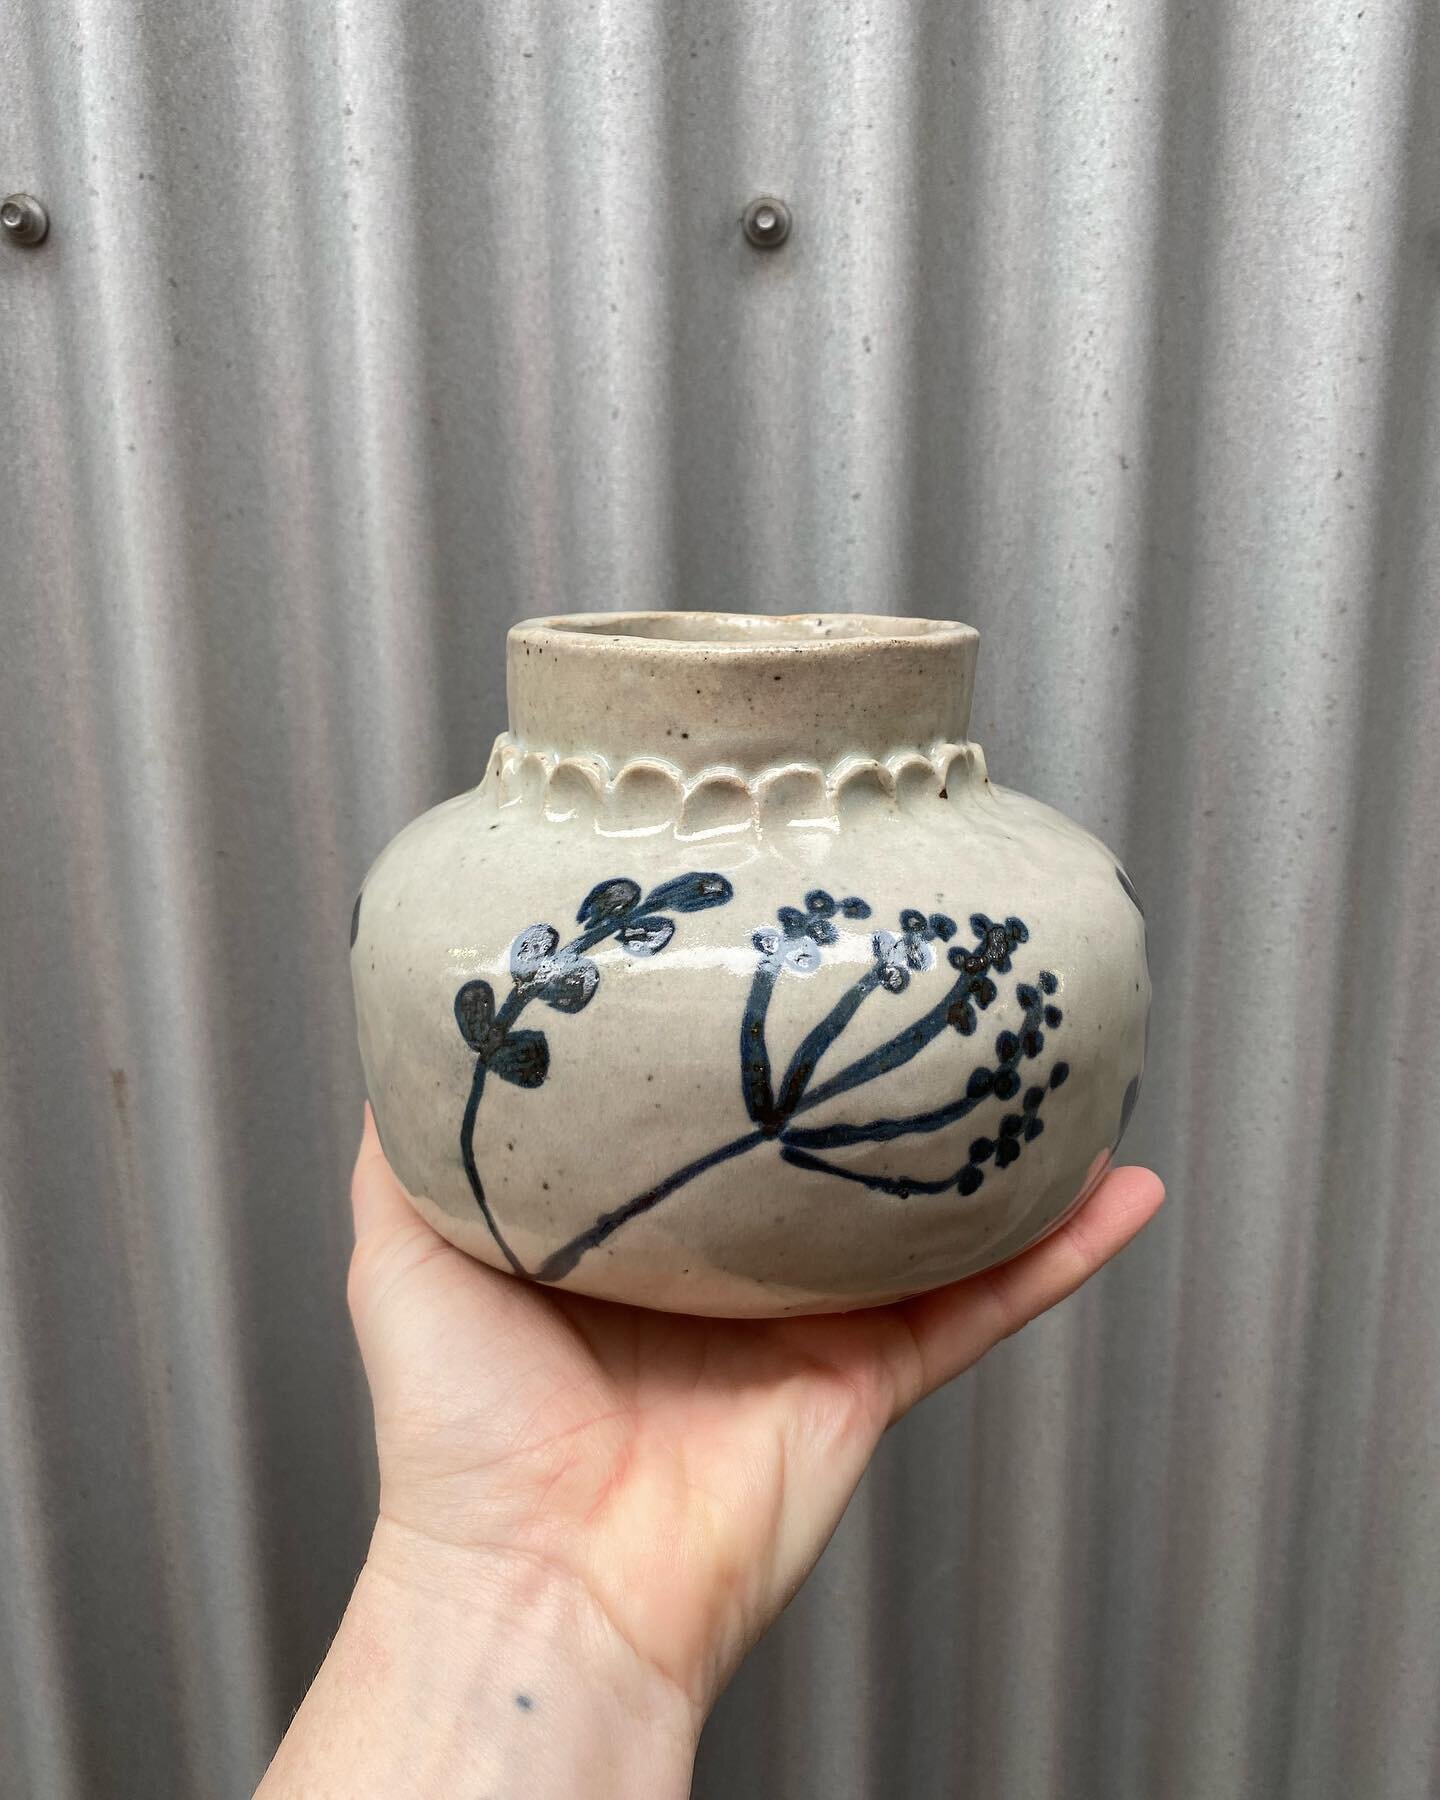 Really happy with how this coil-built vase turned out! It came out of the @pottersguildofbc community gas kiln today. Black underglaze painting under clear glaze.